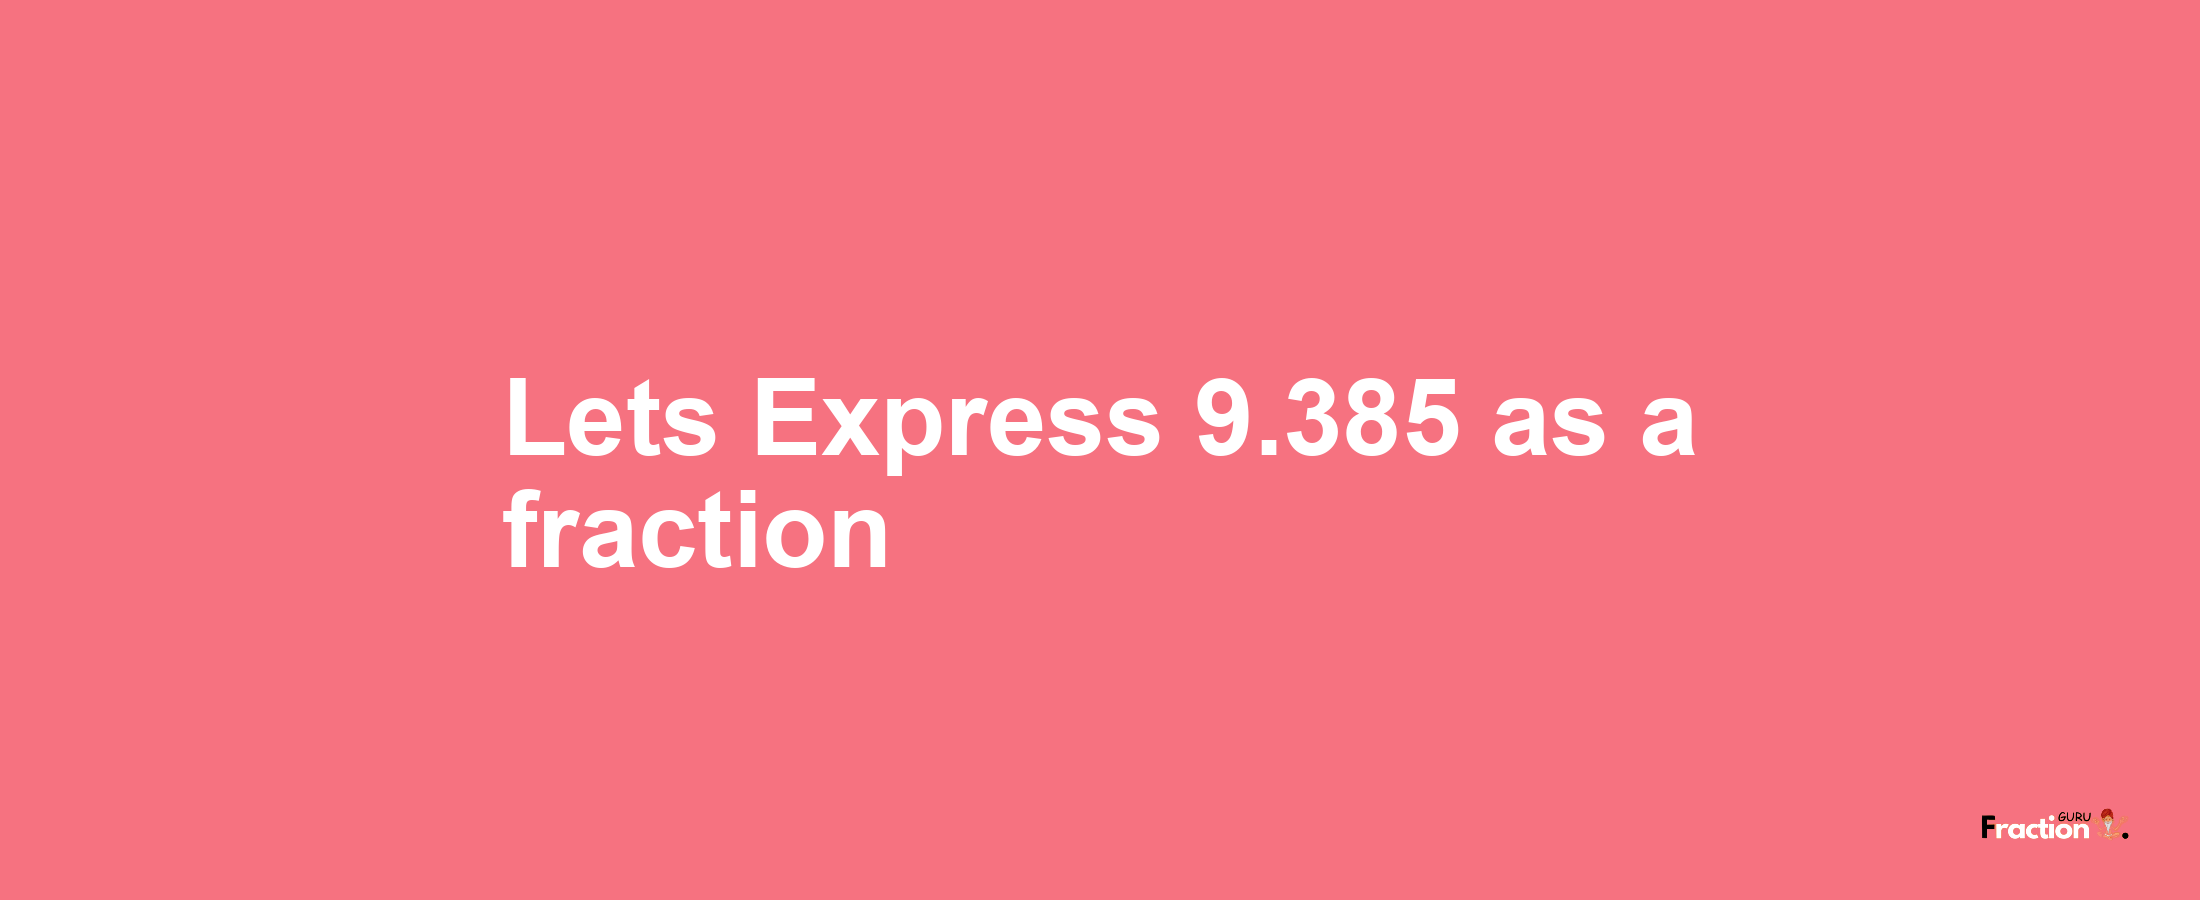 Lets Express 9.385 as afraction